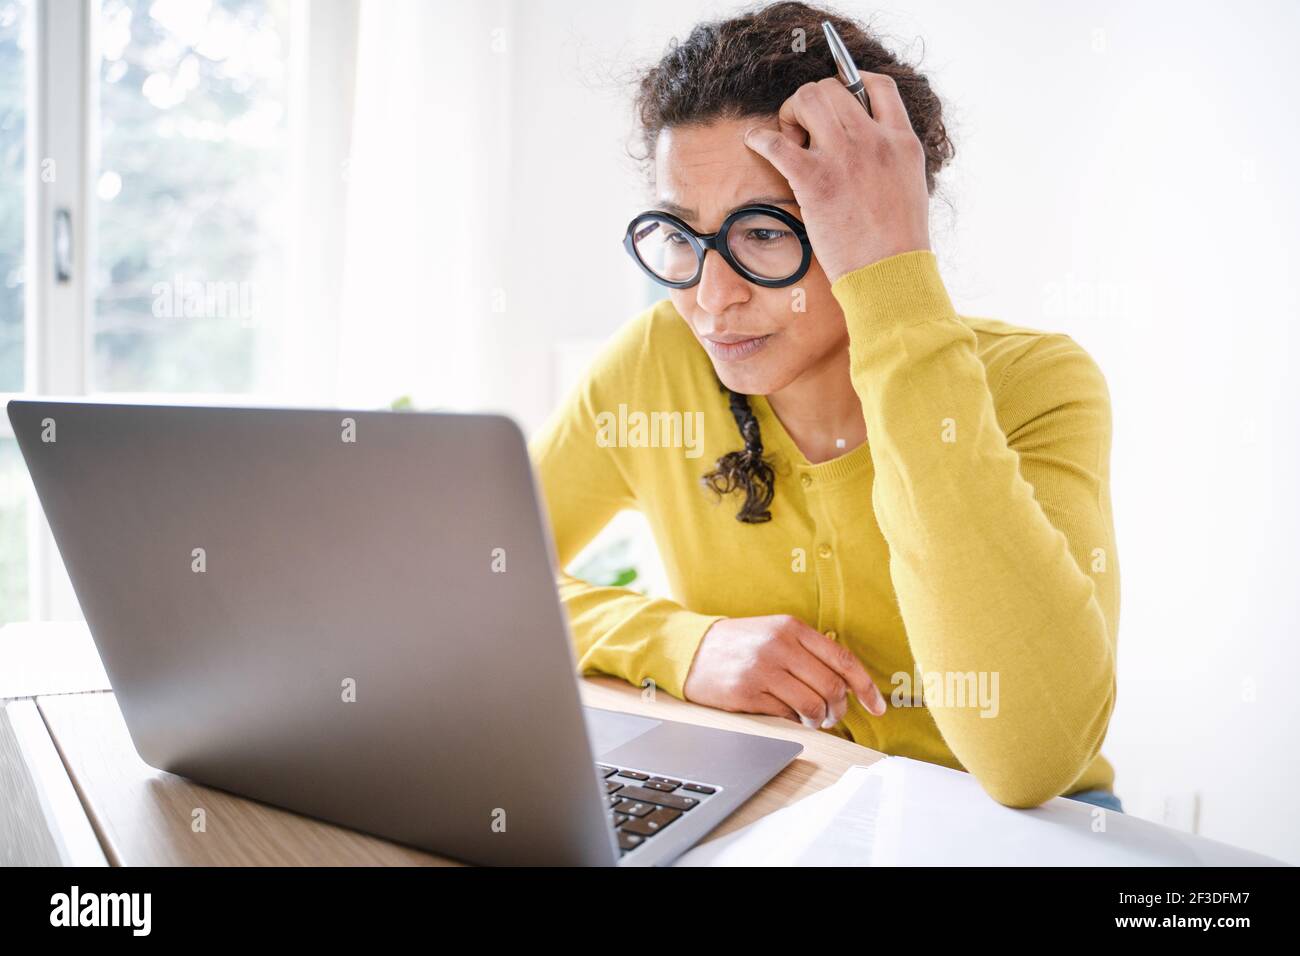 Black woman working hard on some project at computer Stock Photo